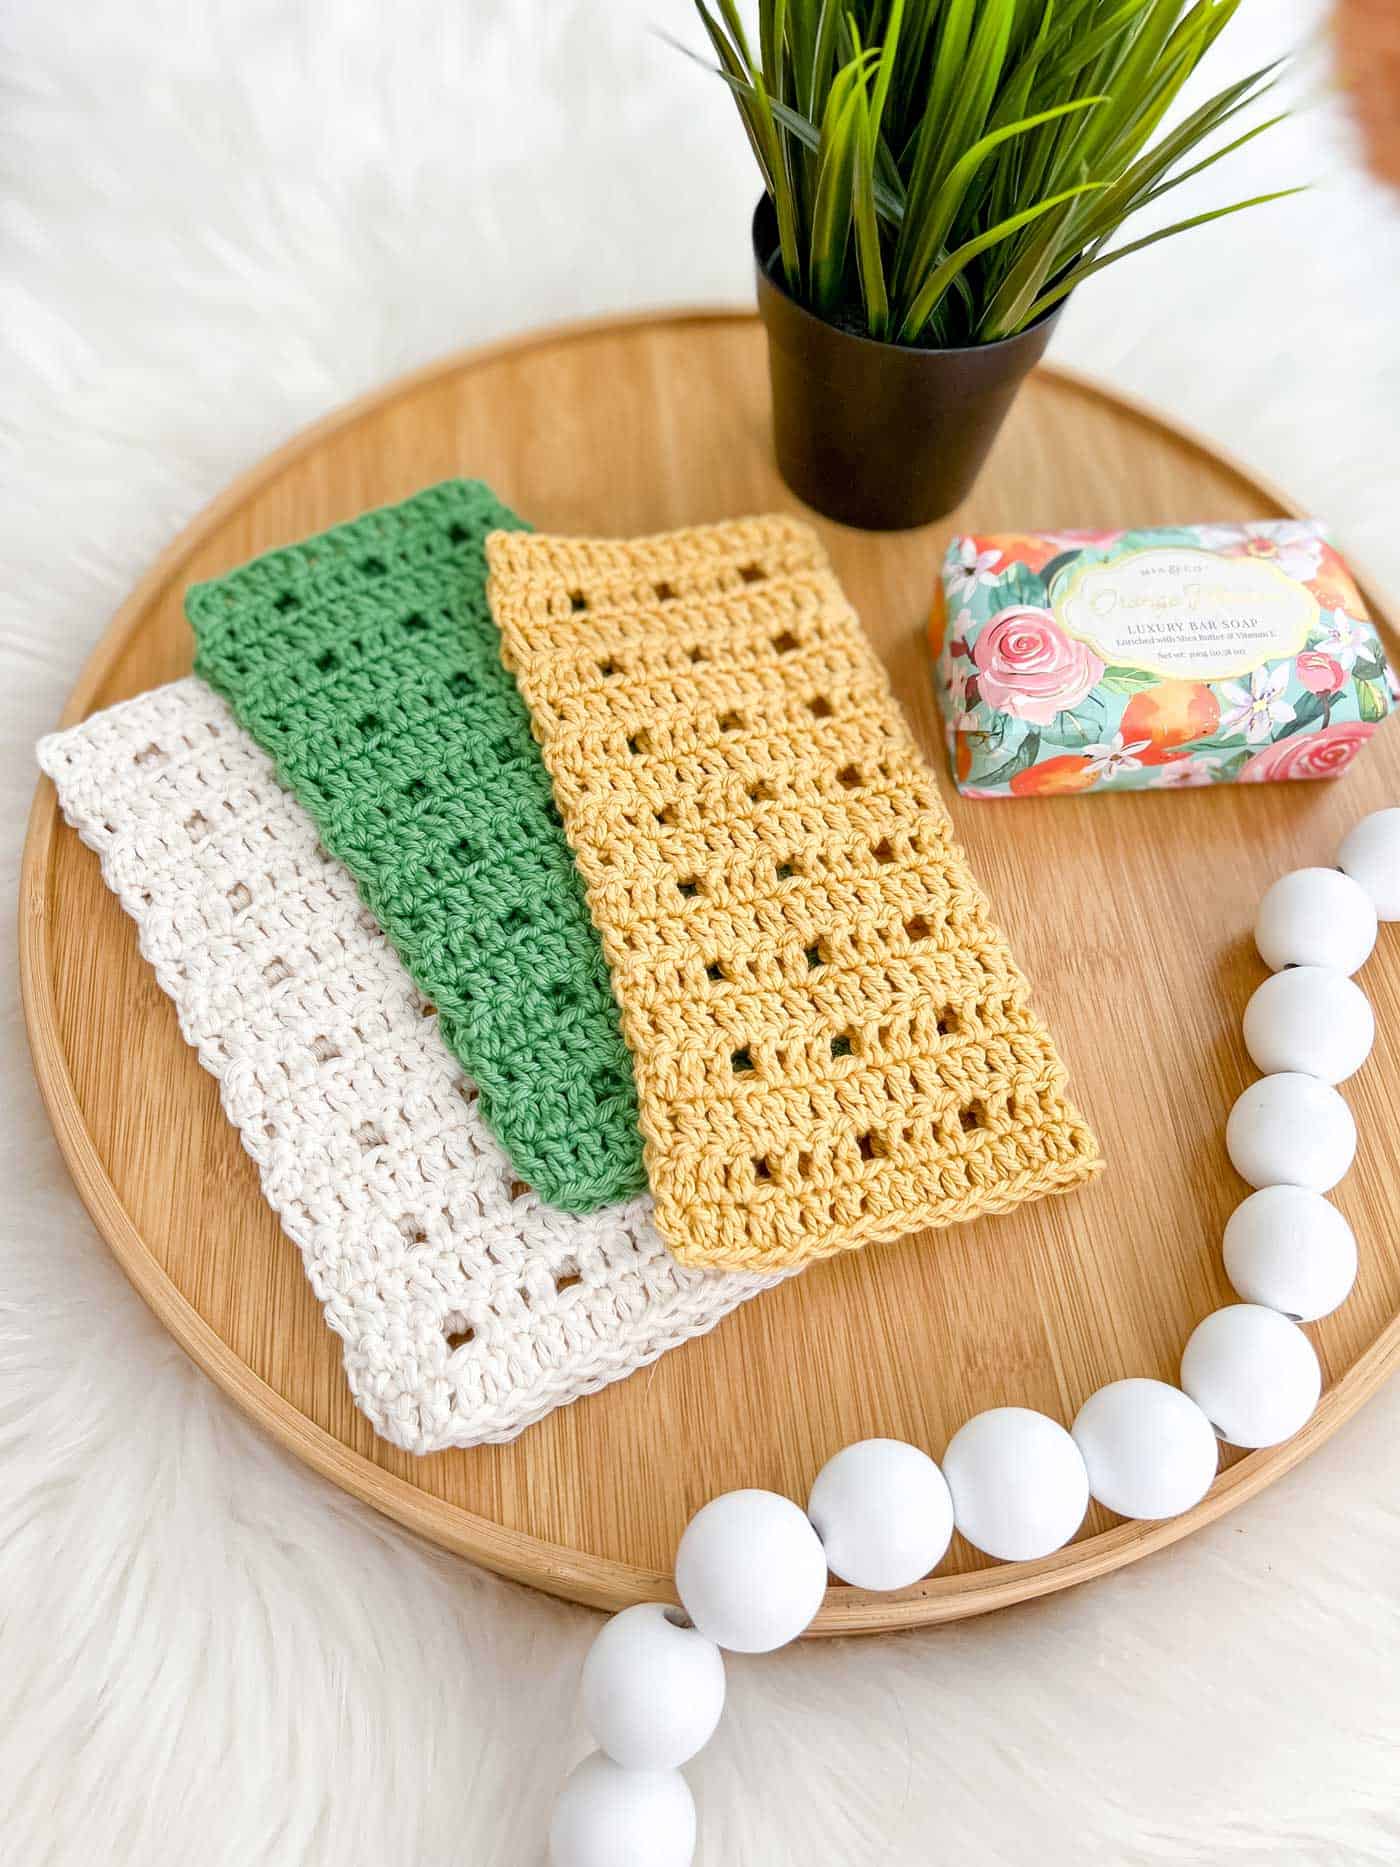 https://daisycottagedesigns.net/wp-content/uploads/2022/06/Squared-Away-Dishcloth-Featured.jpg